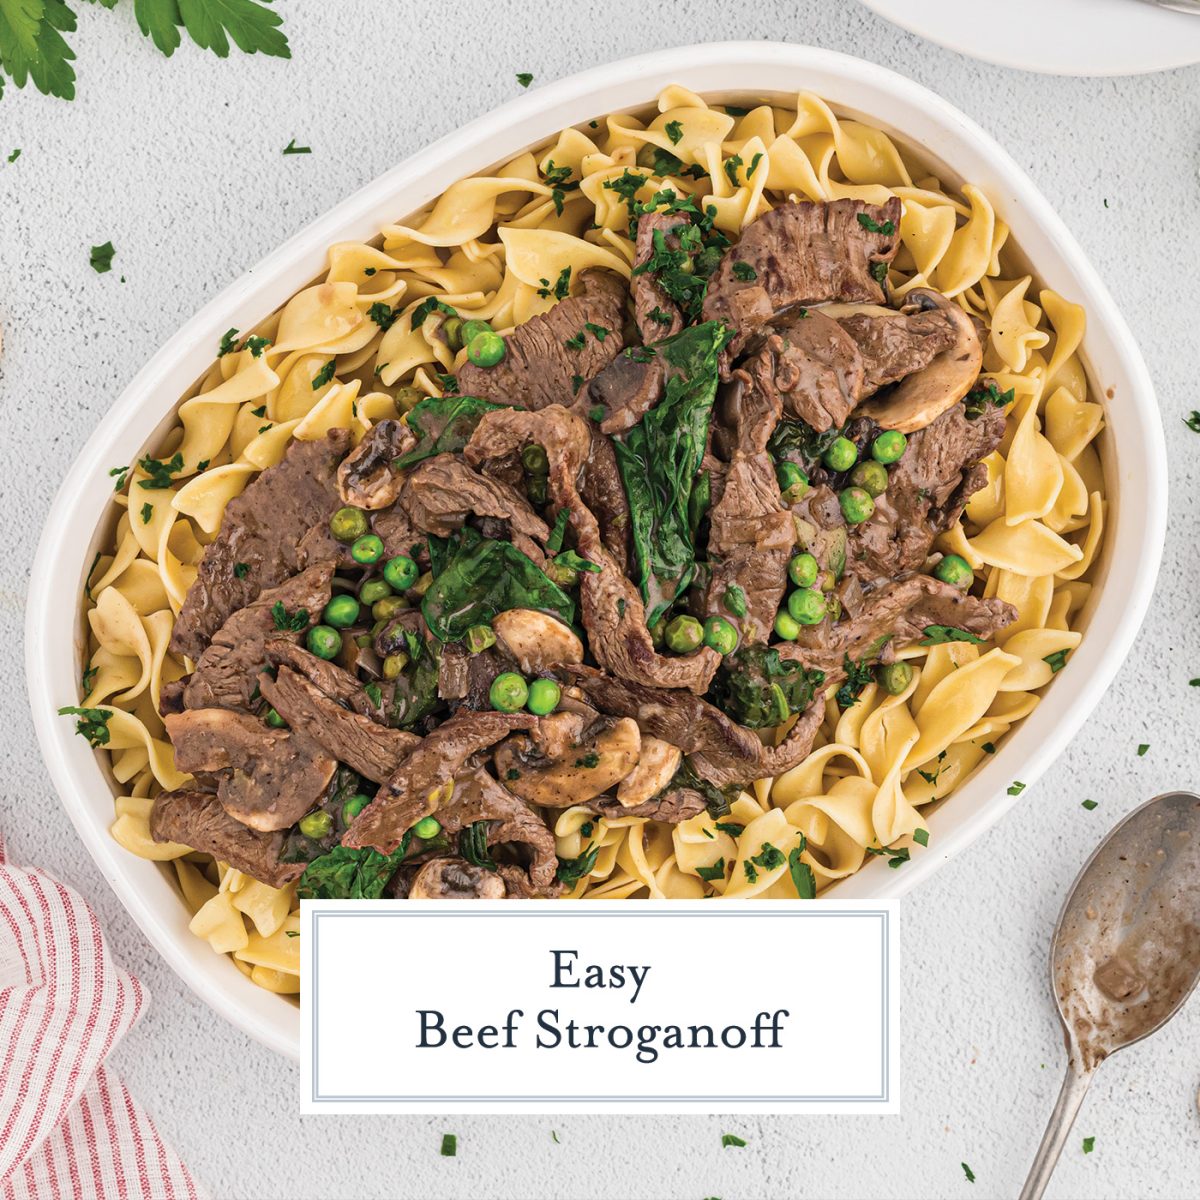 substantial serving dish with buttered noodles topped with pork stroganoff   Skinny Beef Stroganoff Beef Stroganoff 1FBjpg 1200x1200